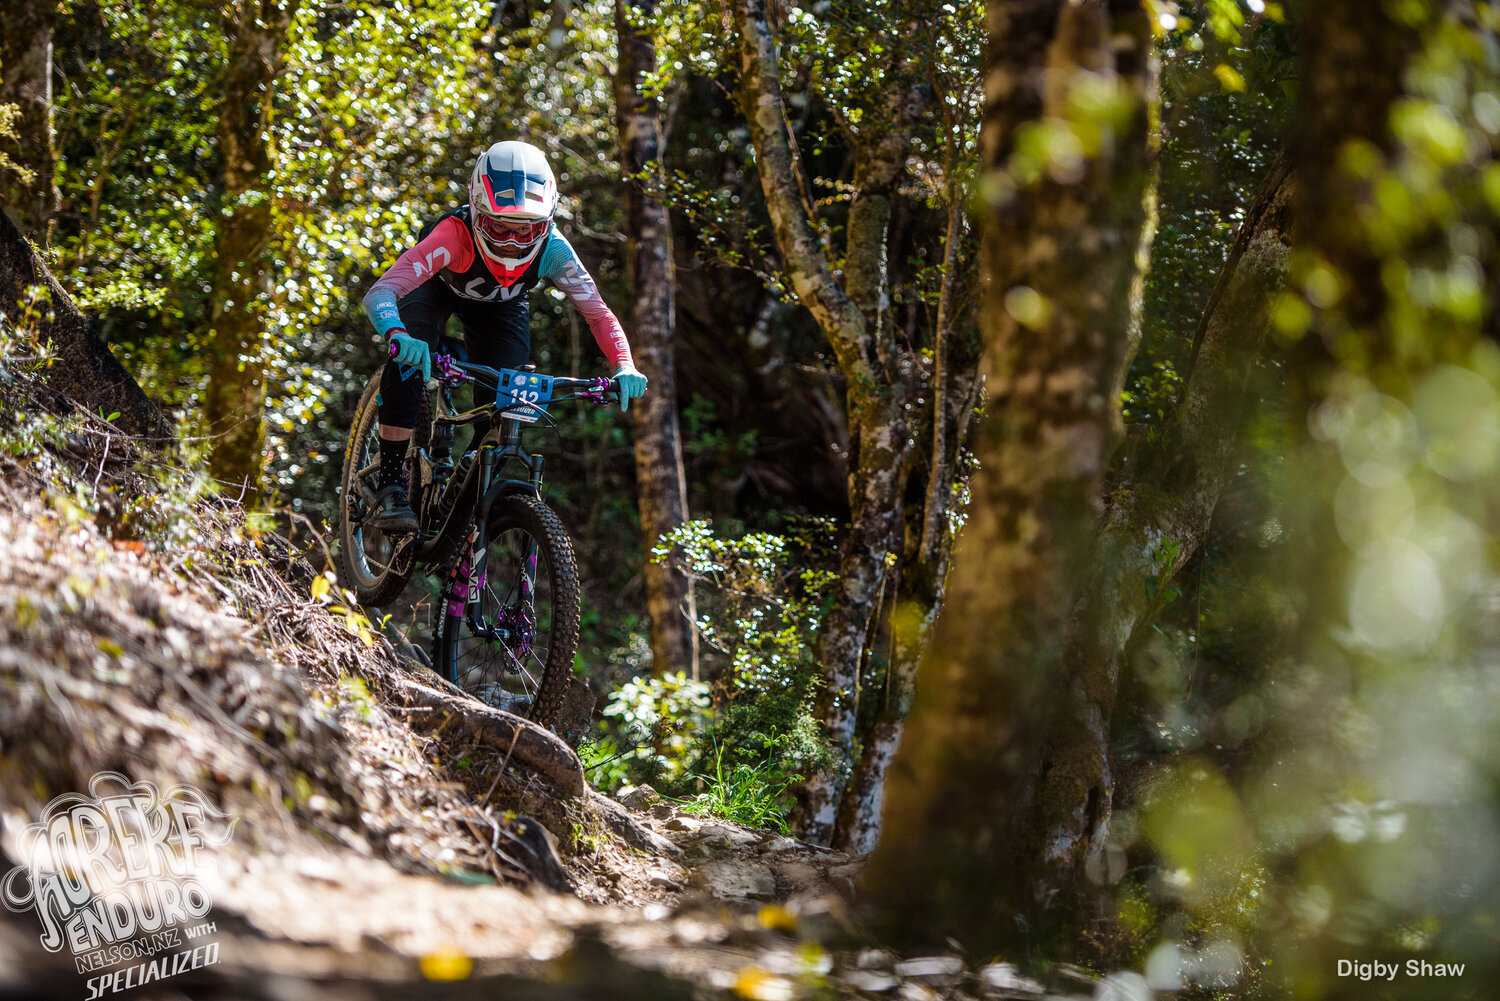 All images from the Aorere Enduro last October.